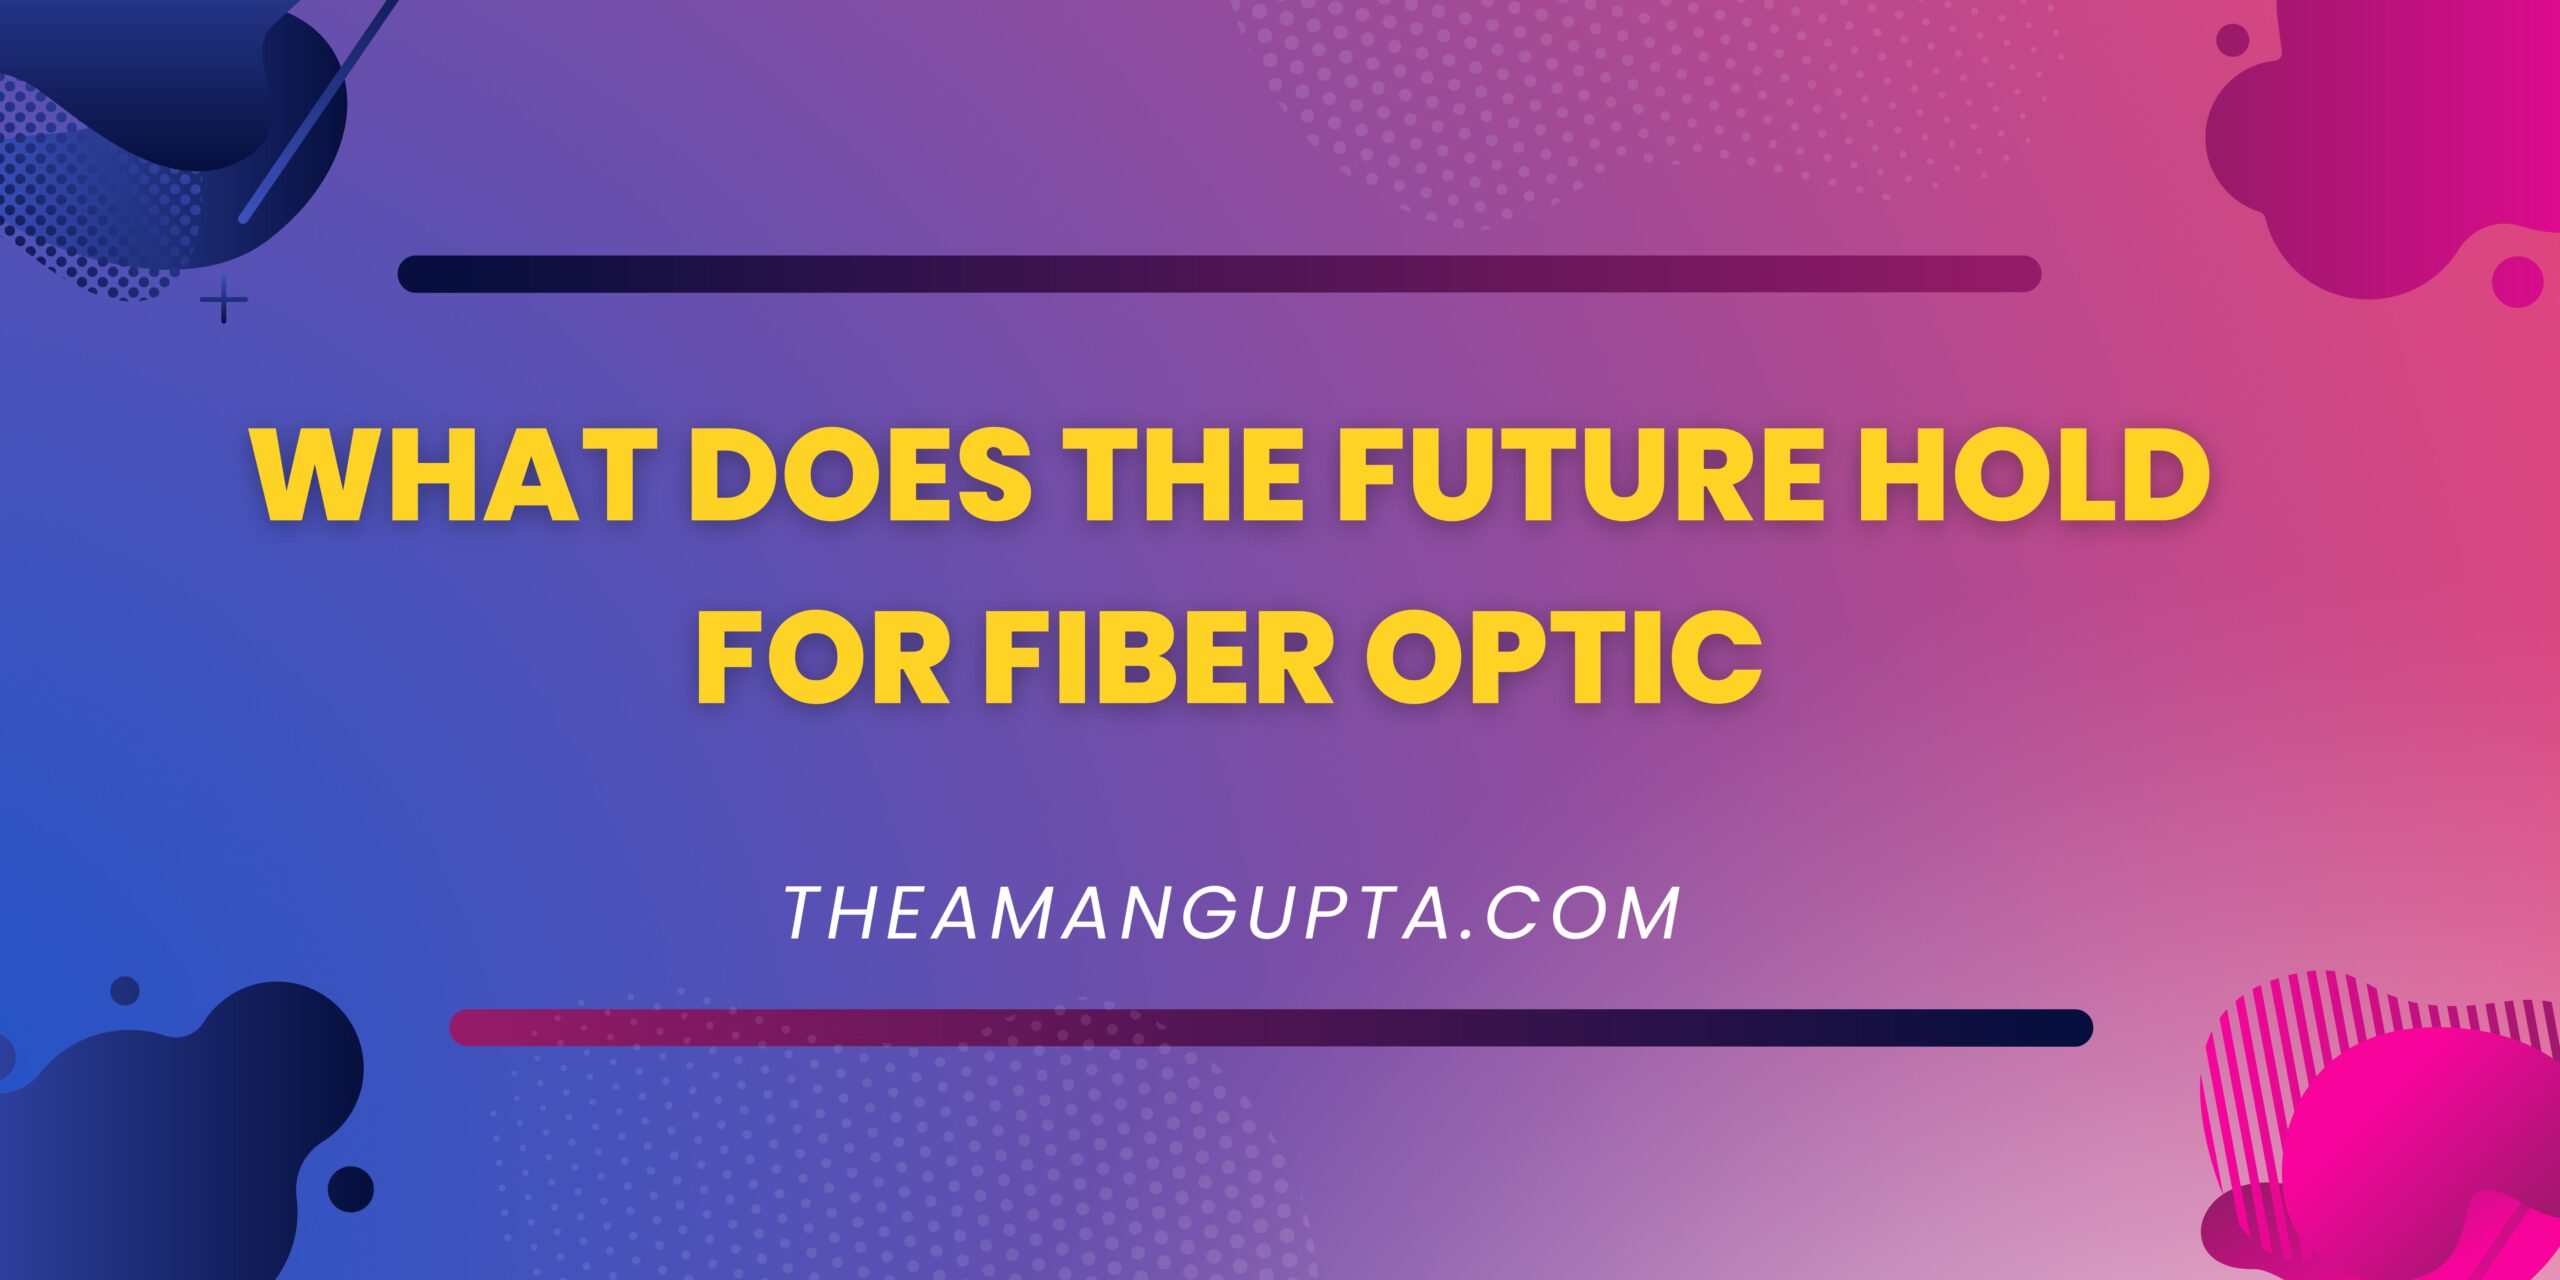 What Does The Future Hold For Fiber Optic|What Does The Future Hold For Fiber Optic|Theamangupta|Theamangupta